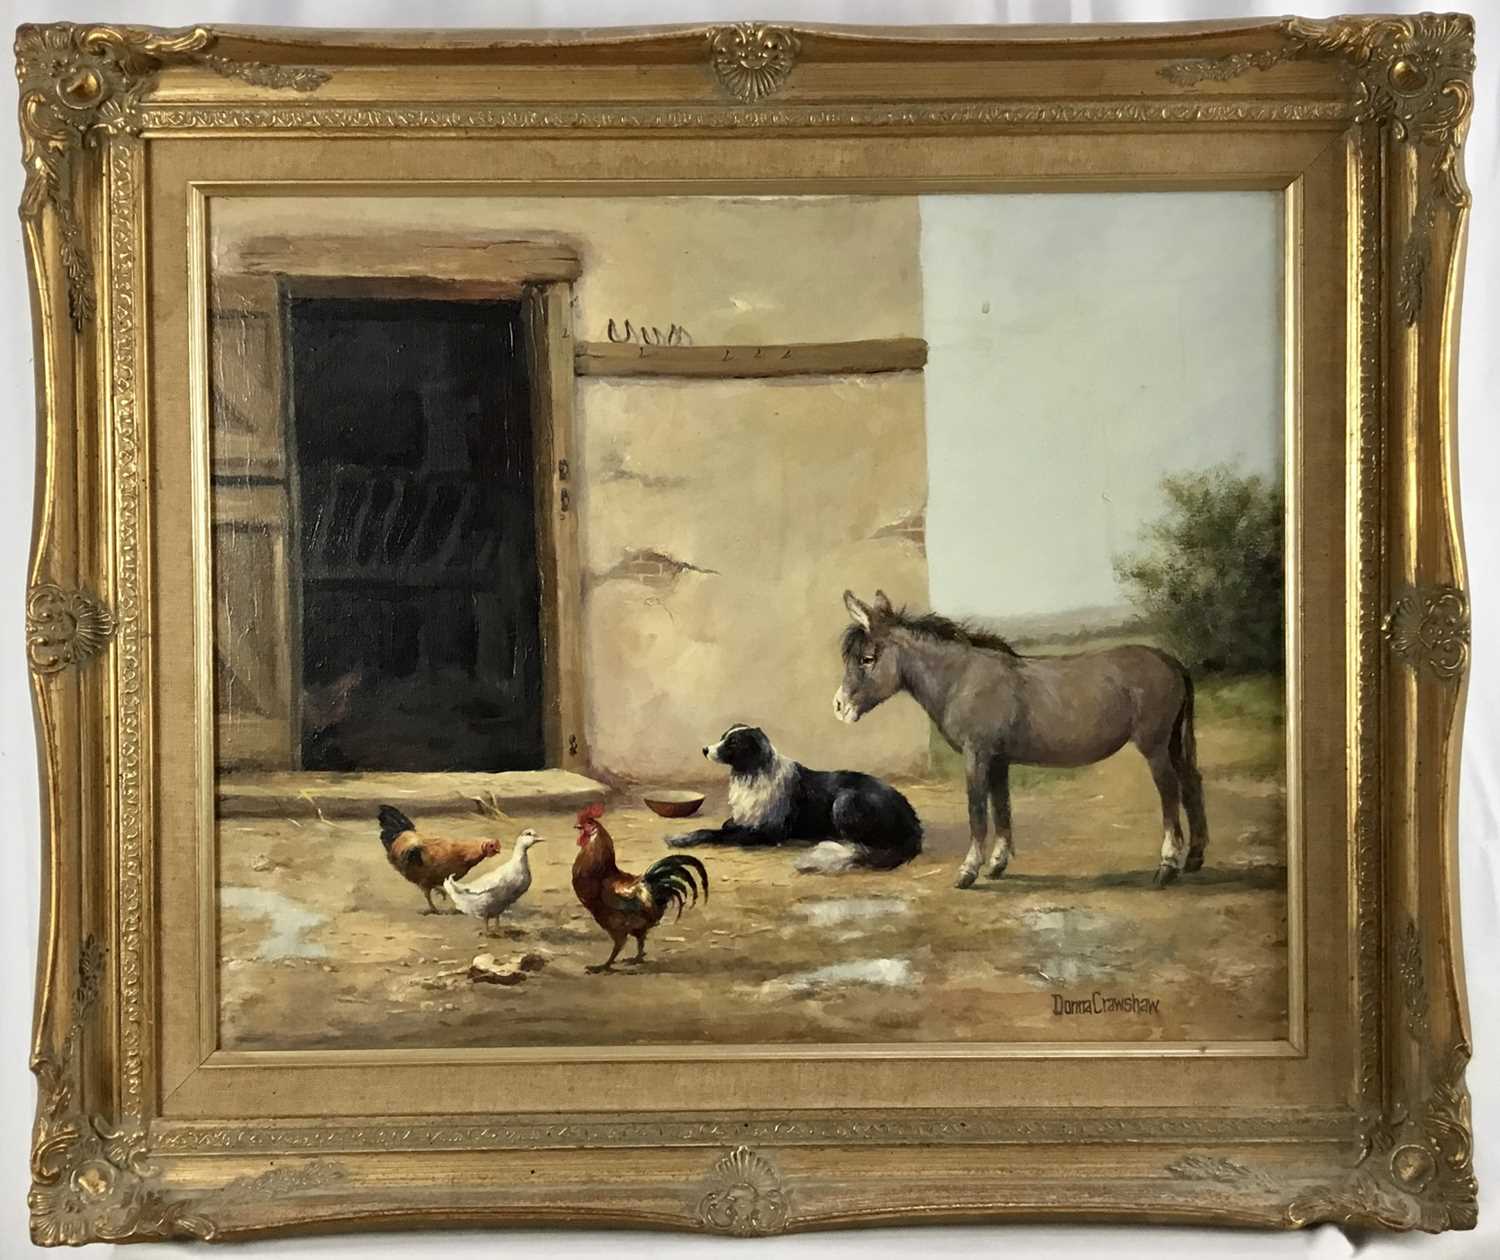 Lot 79 - Donna Crawshaw (b.1960) oil on canvas - ‘An Empty Bowl’, poultry, a sheepdog and a donkey by a stable door, signed, 40 x 50cm, in gilt frame 65cm x 55cm overall